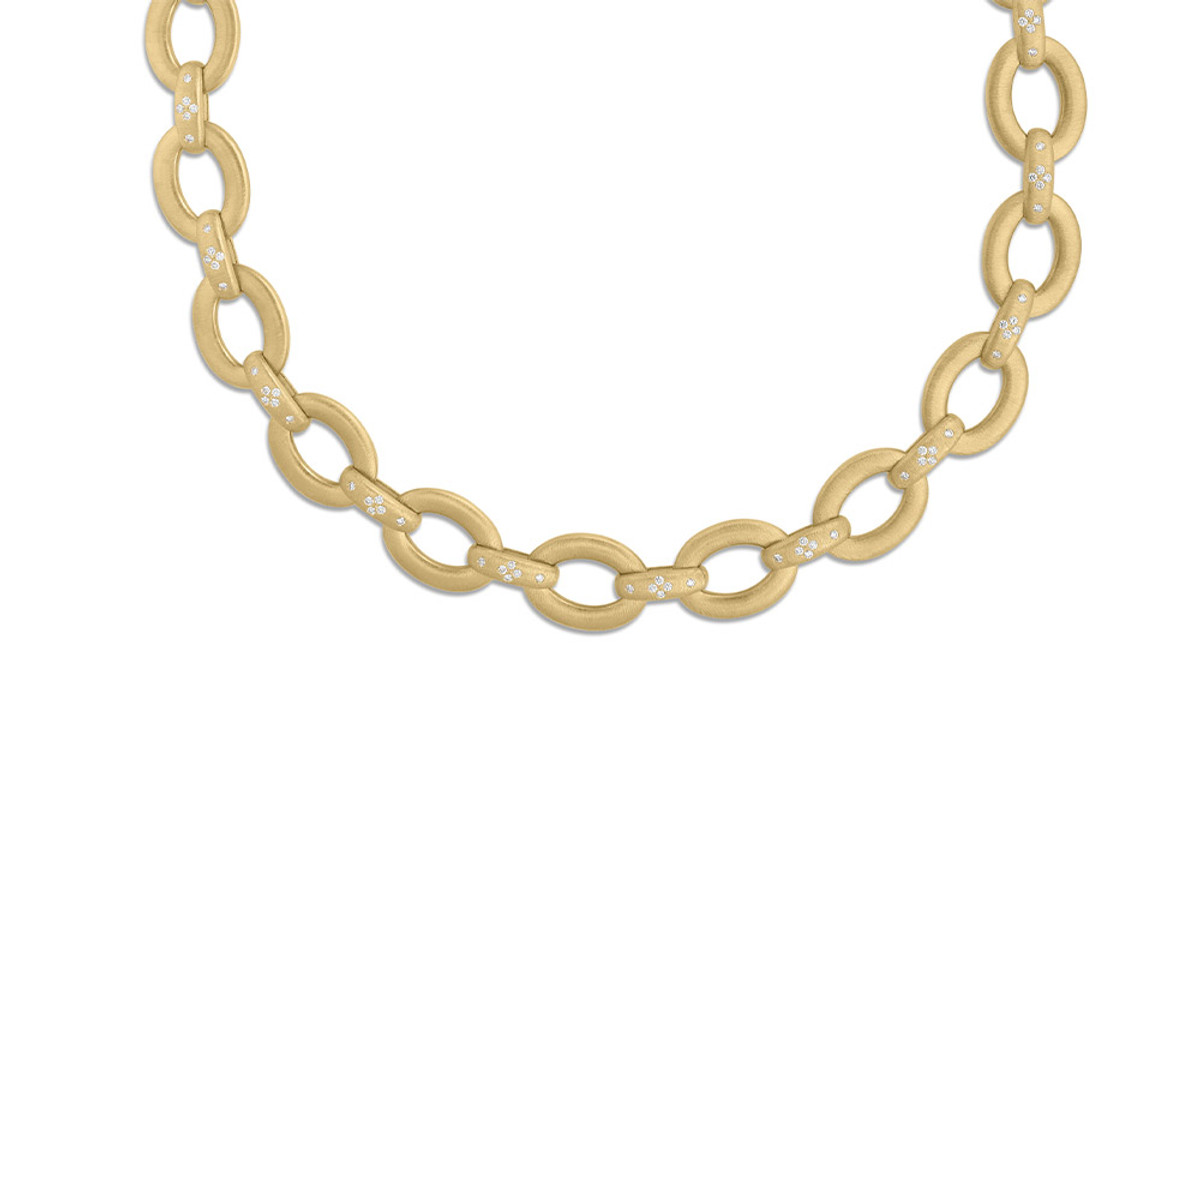 Roberto Coin 18K Yellow Gold Duchessa Satin Finish & Diamond Accent Oval Link Necklace-57392 Product Image